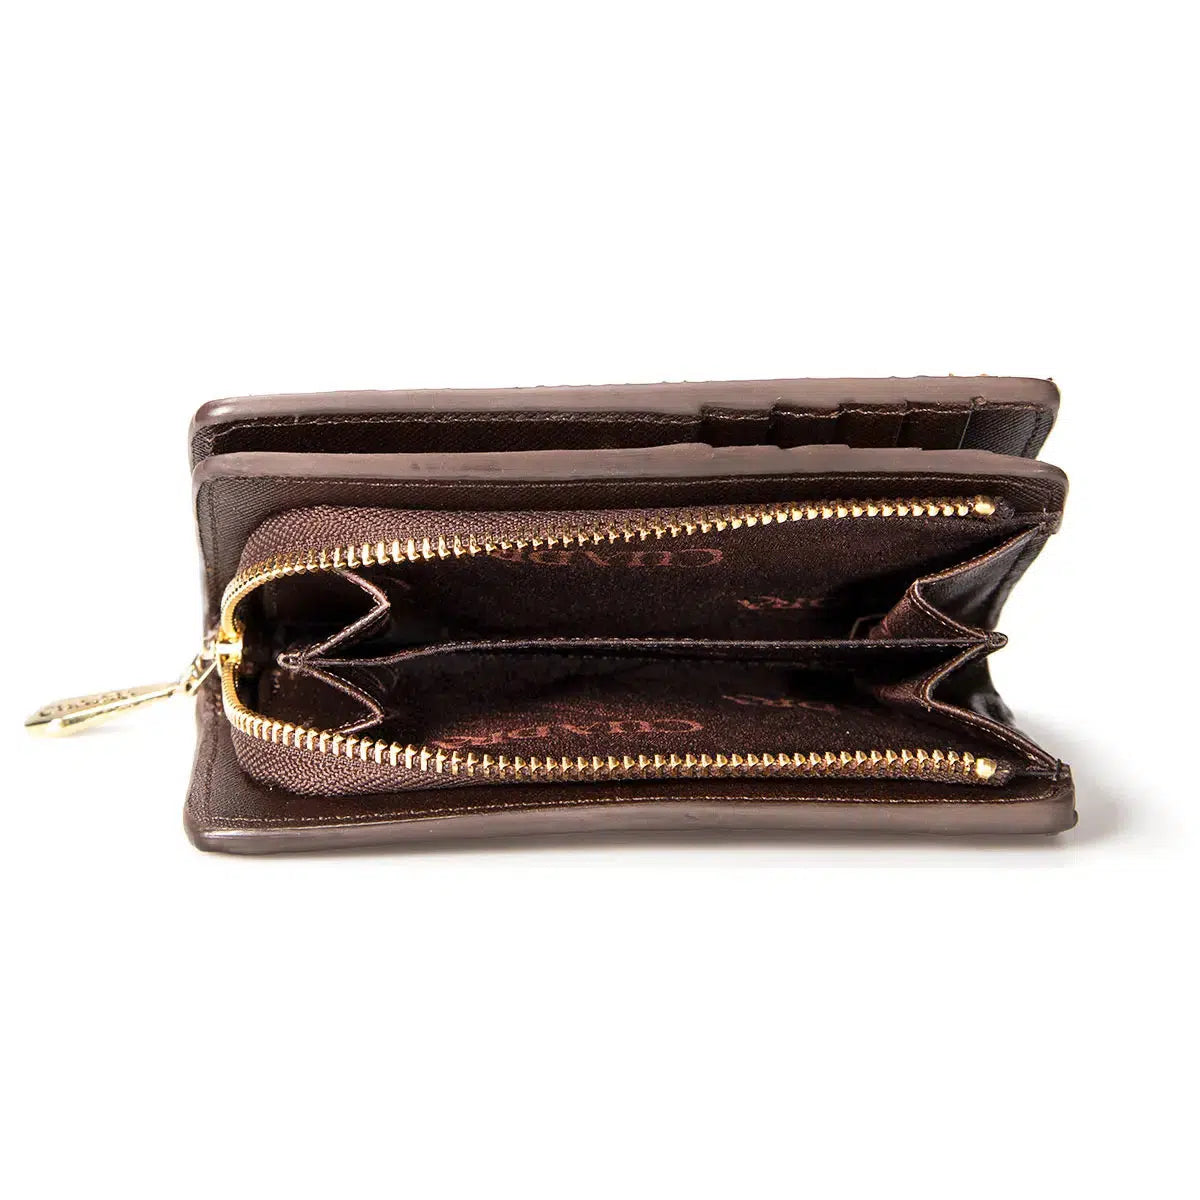 Womens Wallet - Honey Brown Leather